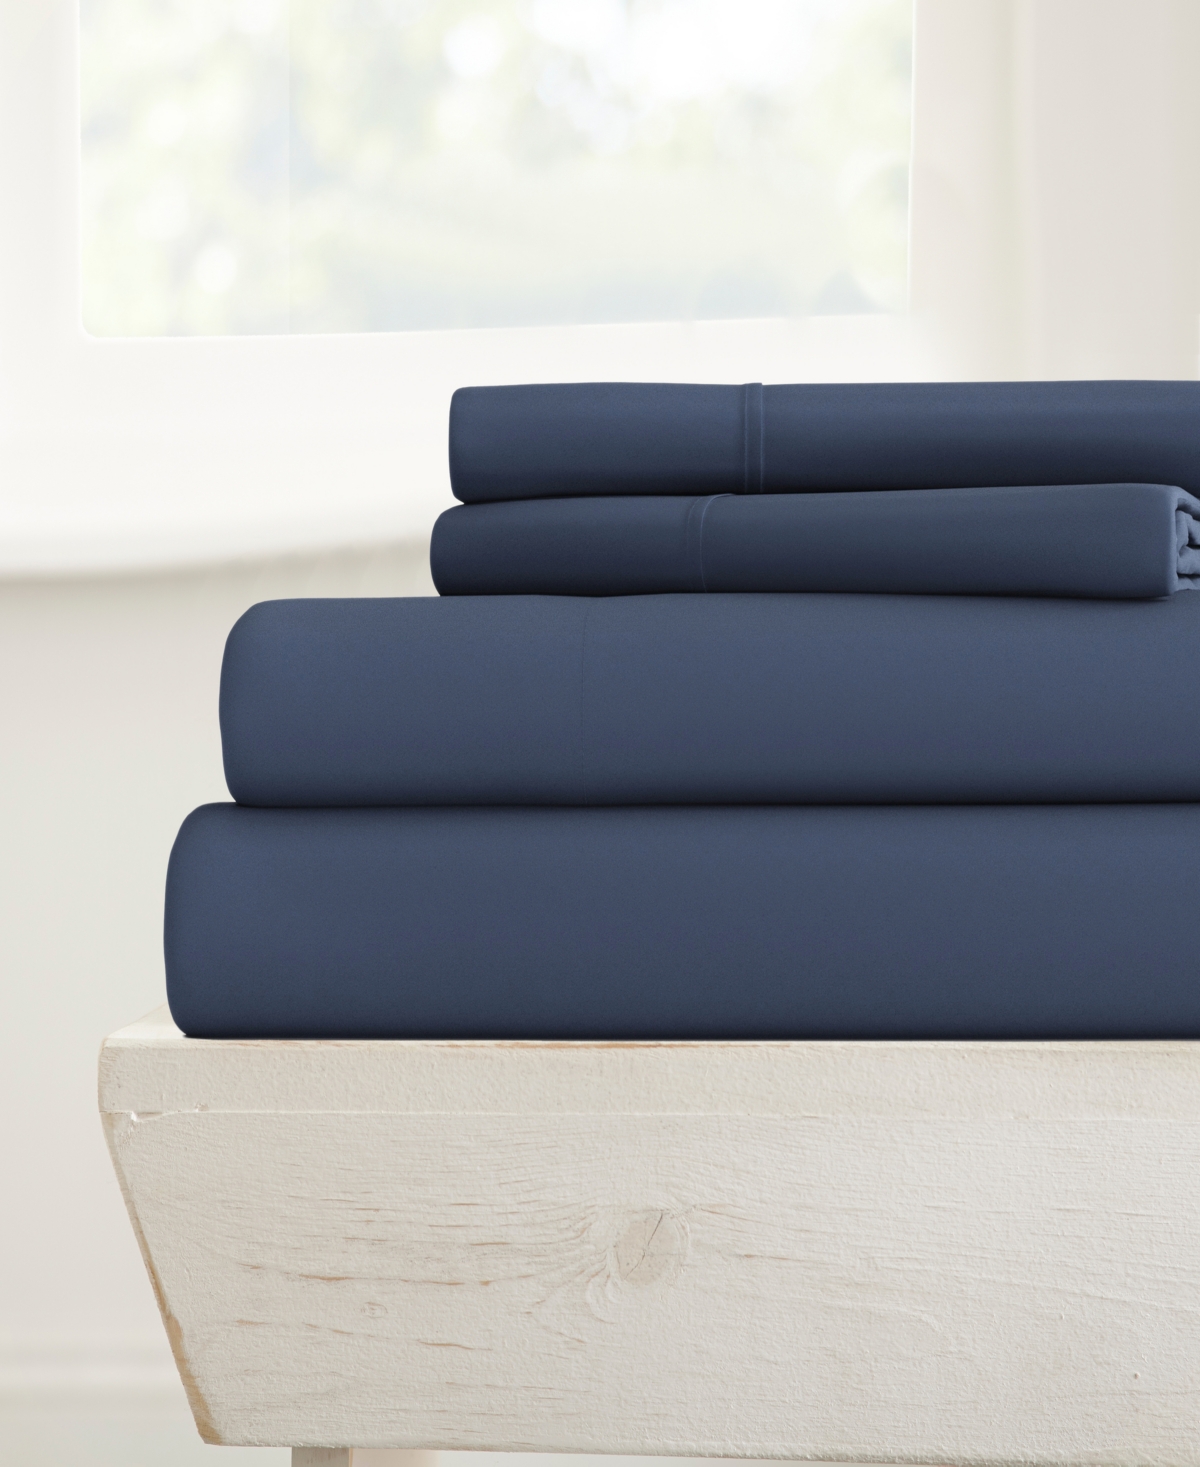 Ienjoy Home Style Simplified By The Home Collection 4 Piece Bed Sheet Set, Queen Bedding In Navy